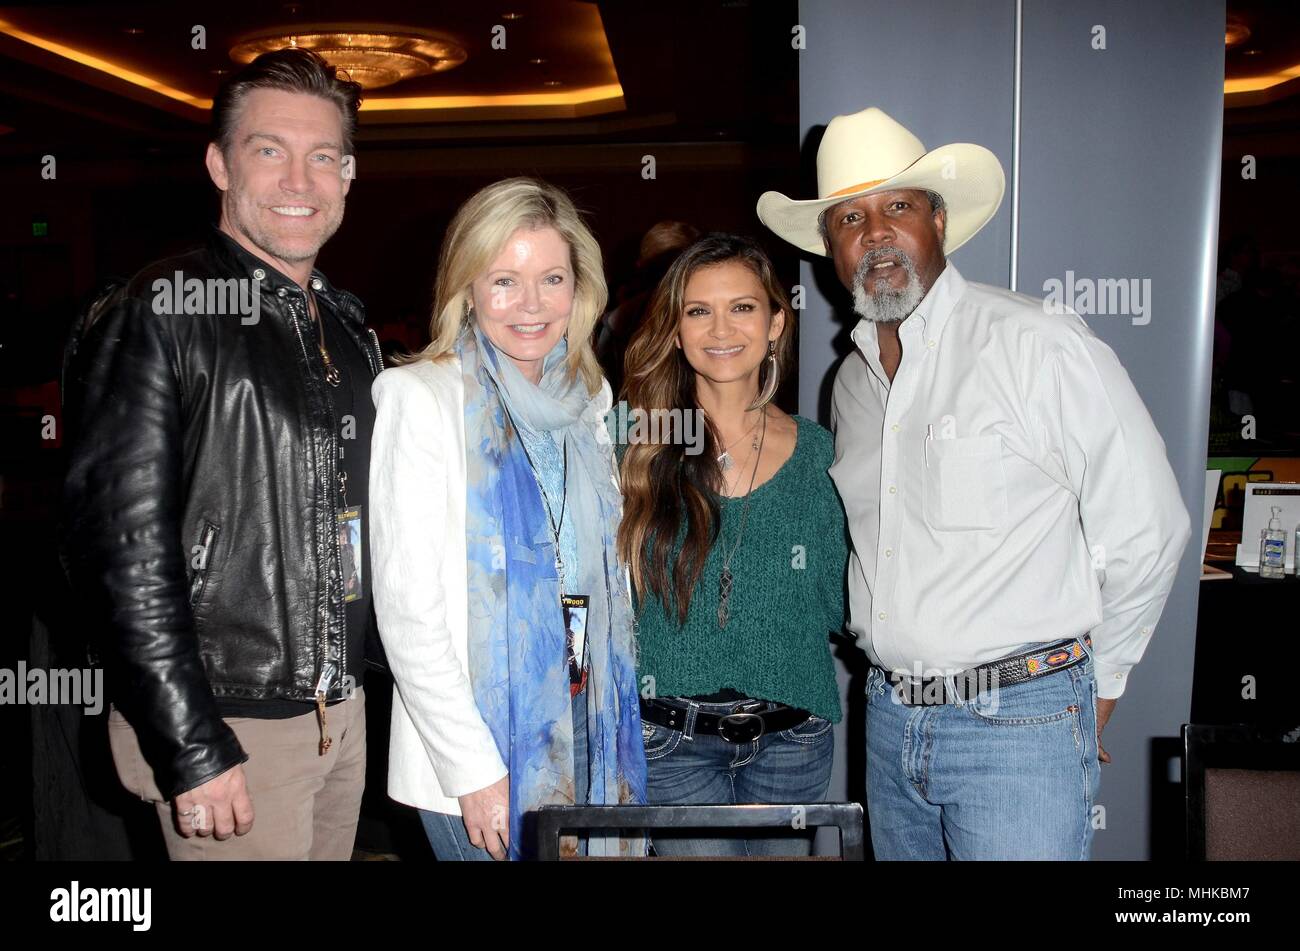 Los Angeles, CA, USA. 28th Apr, 2018. Judson Mills, Sheree J. Wilson, Nia Peeples, Clarence Gilyard at arrivals for The Hollywood Show, Westin LAX, Los Angeles, CA April 28, 2018. Credit: Priscilla Grant/Everett Collection/Alamy Live News Stock Photo